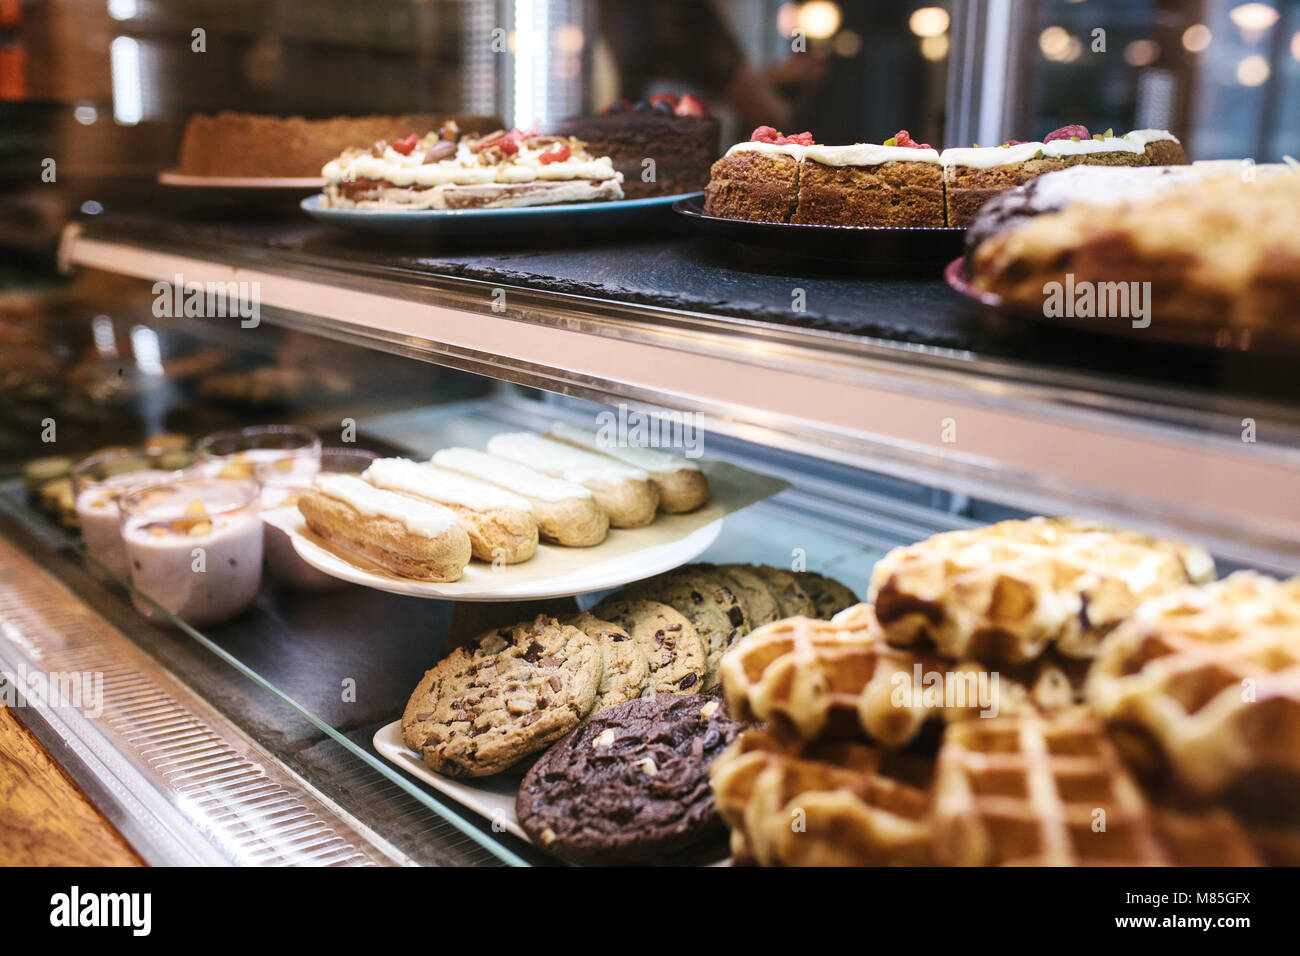 Large selection of cakes and pastries on the counter in a cafe. Sale of delicious sweets Stock Photo